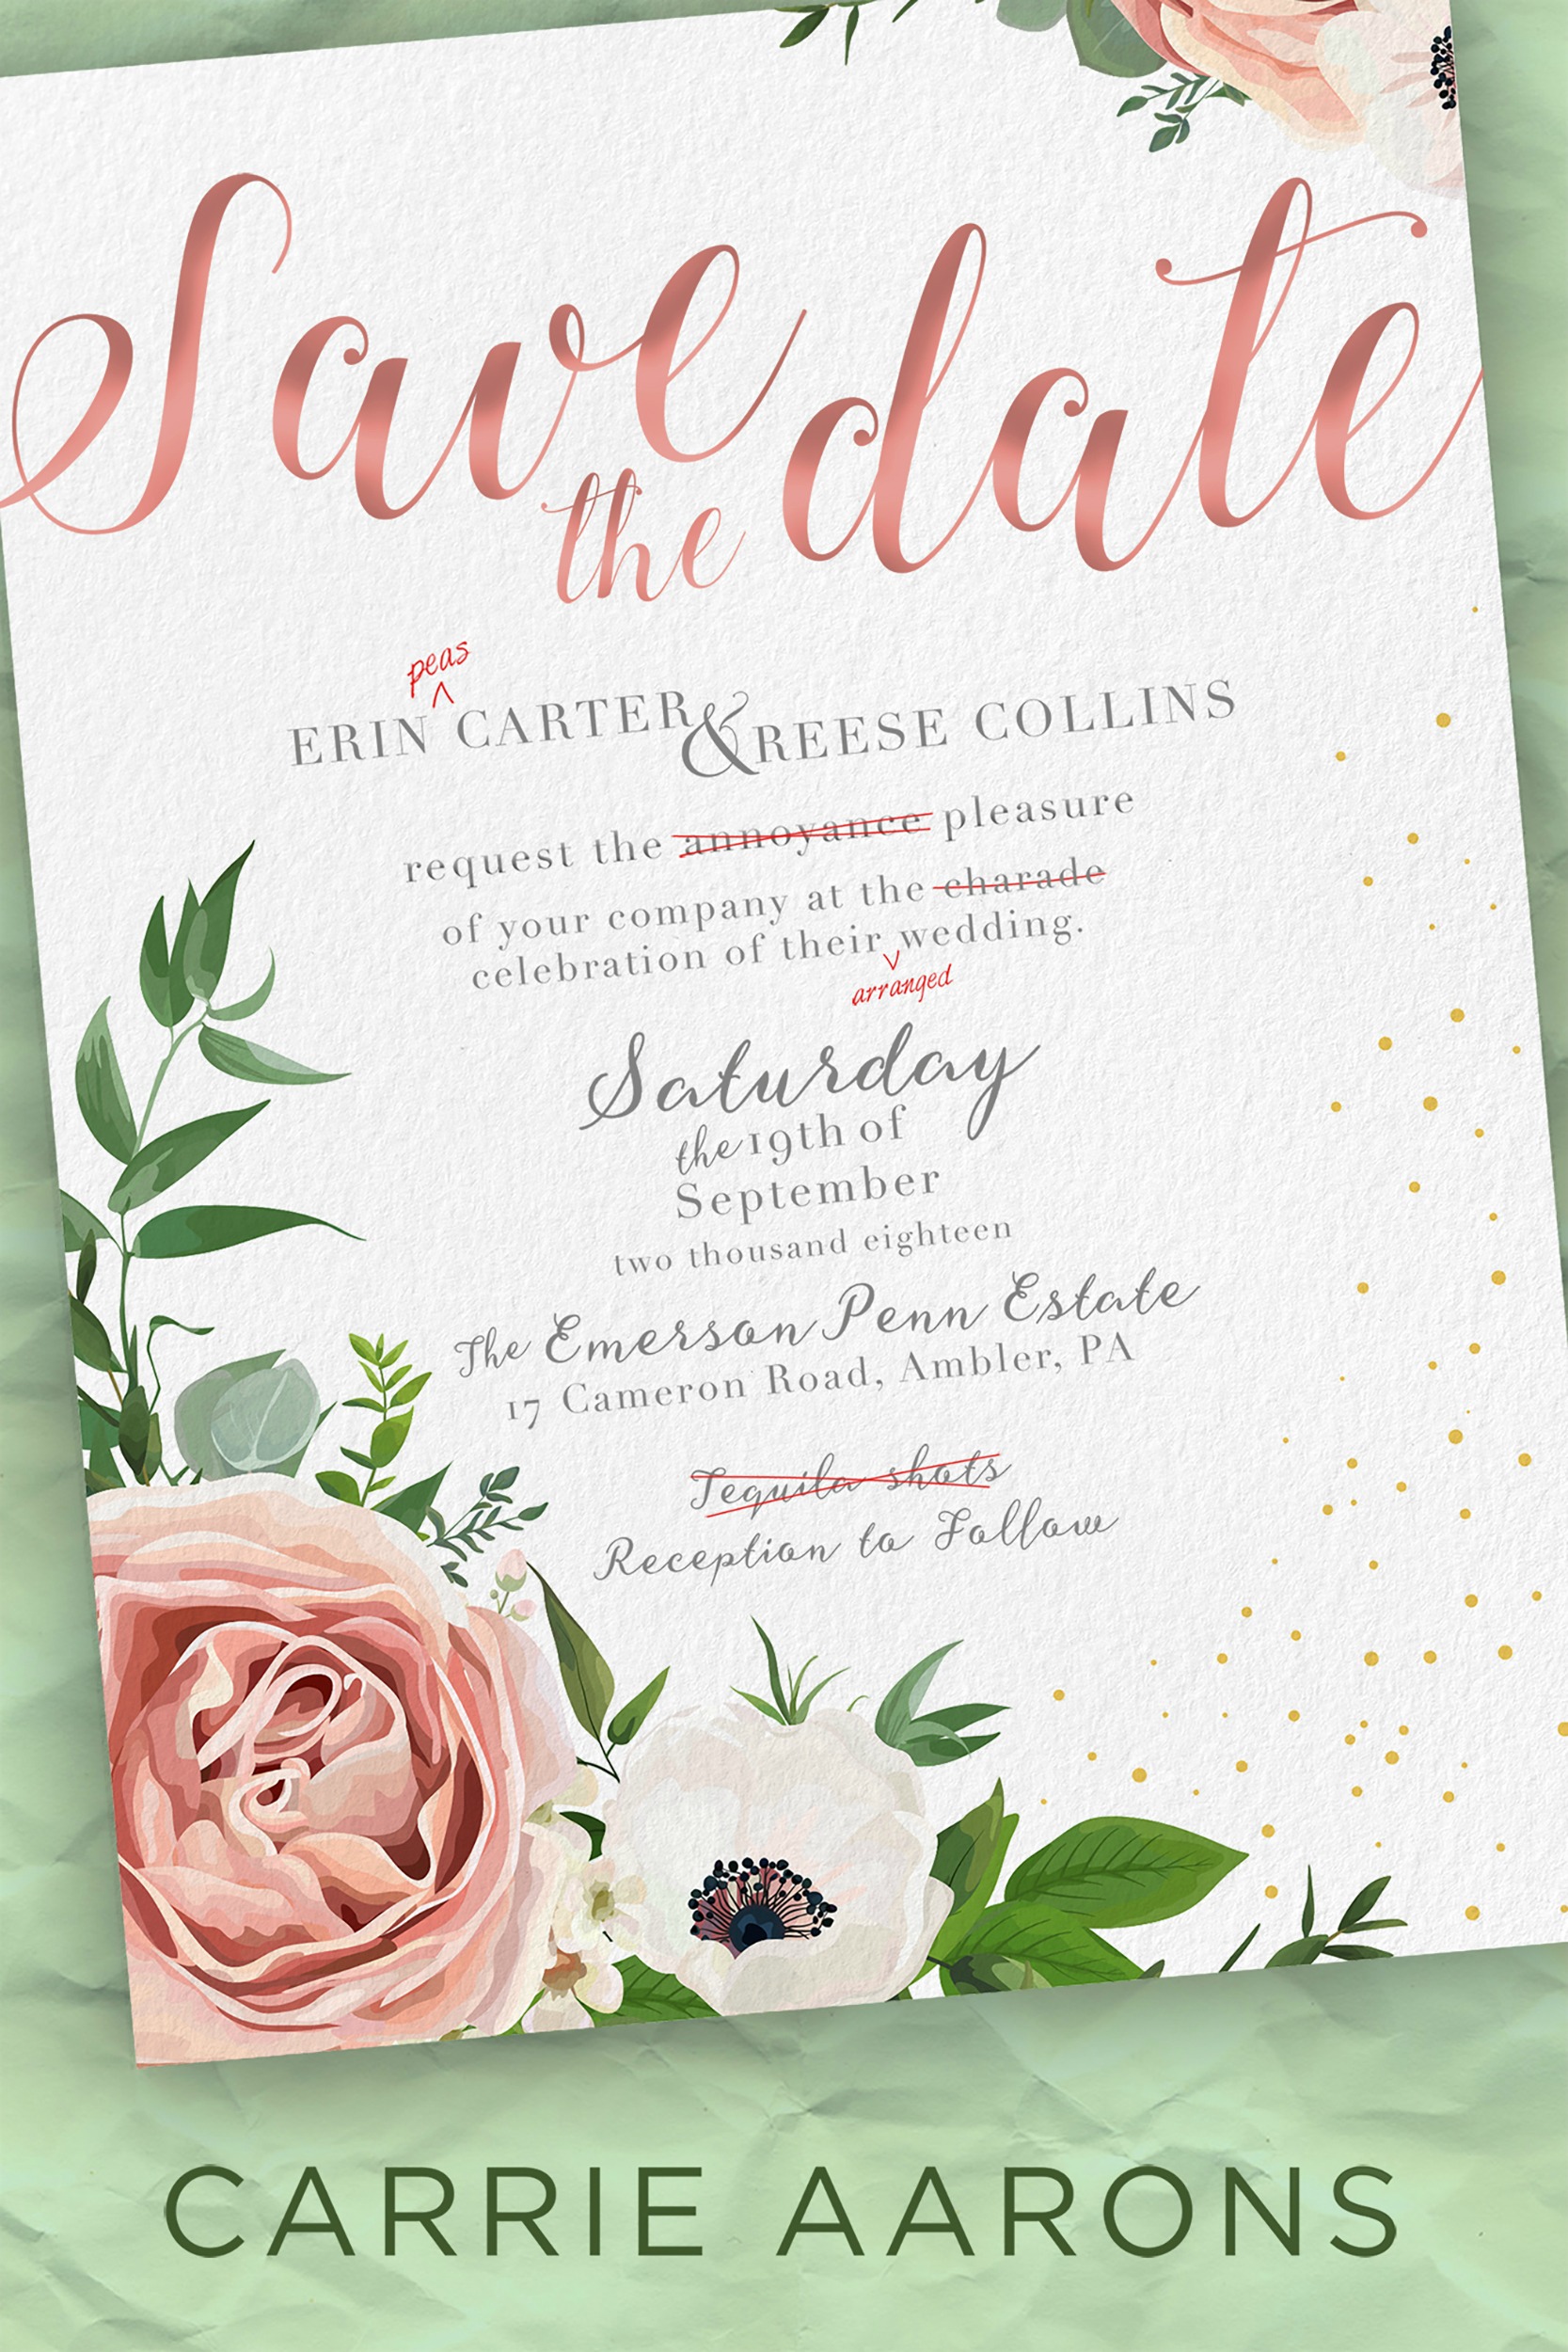 Save the Date by Carrie Aarons [Cover Reveal]